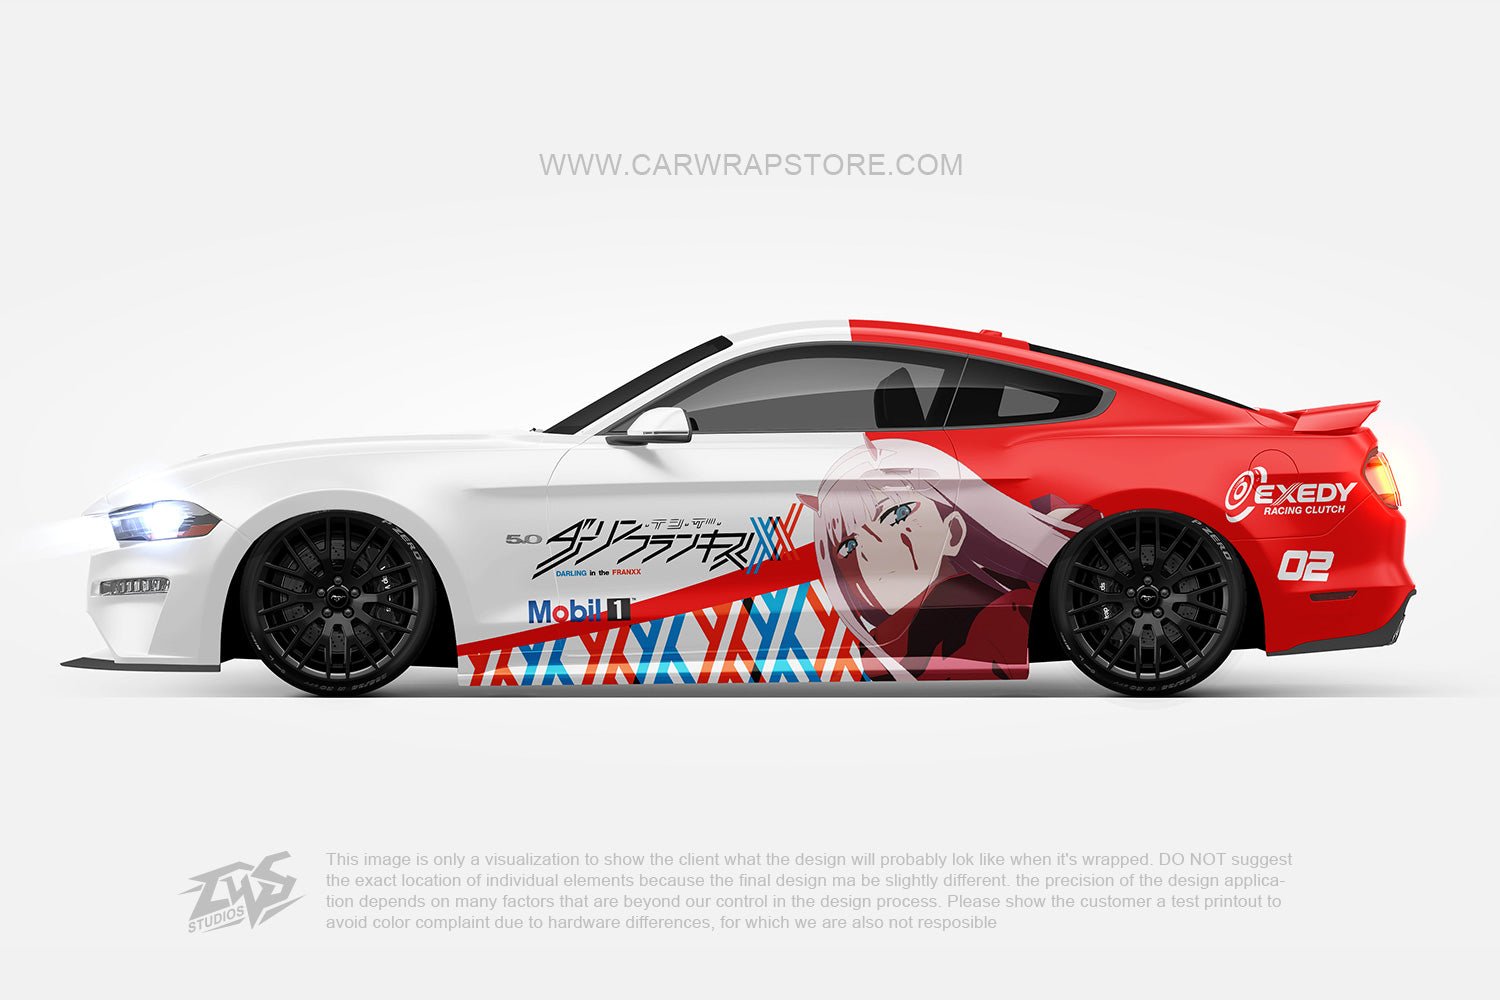 Zero Two DARLING in the FRANXX【002-14】 - Car Wrap Store